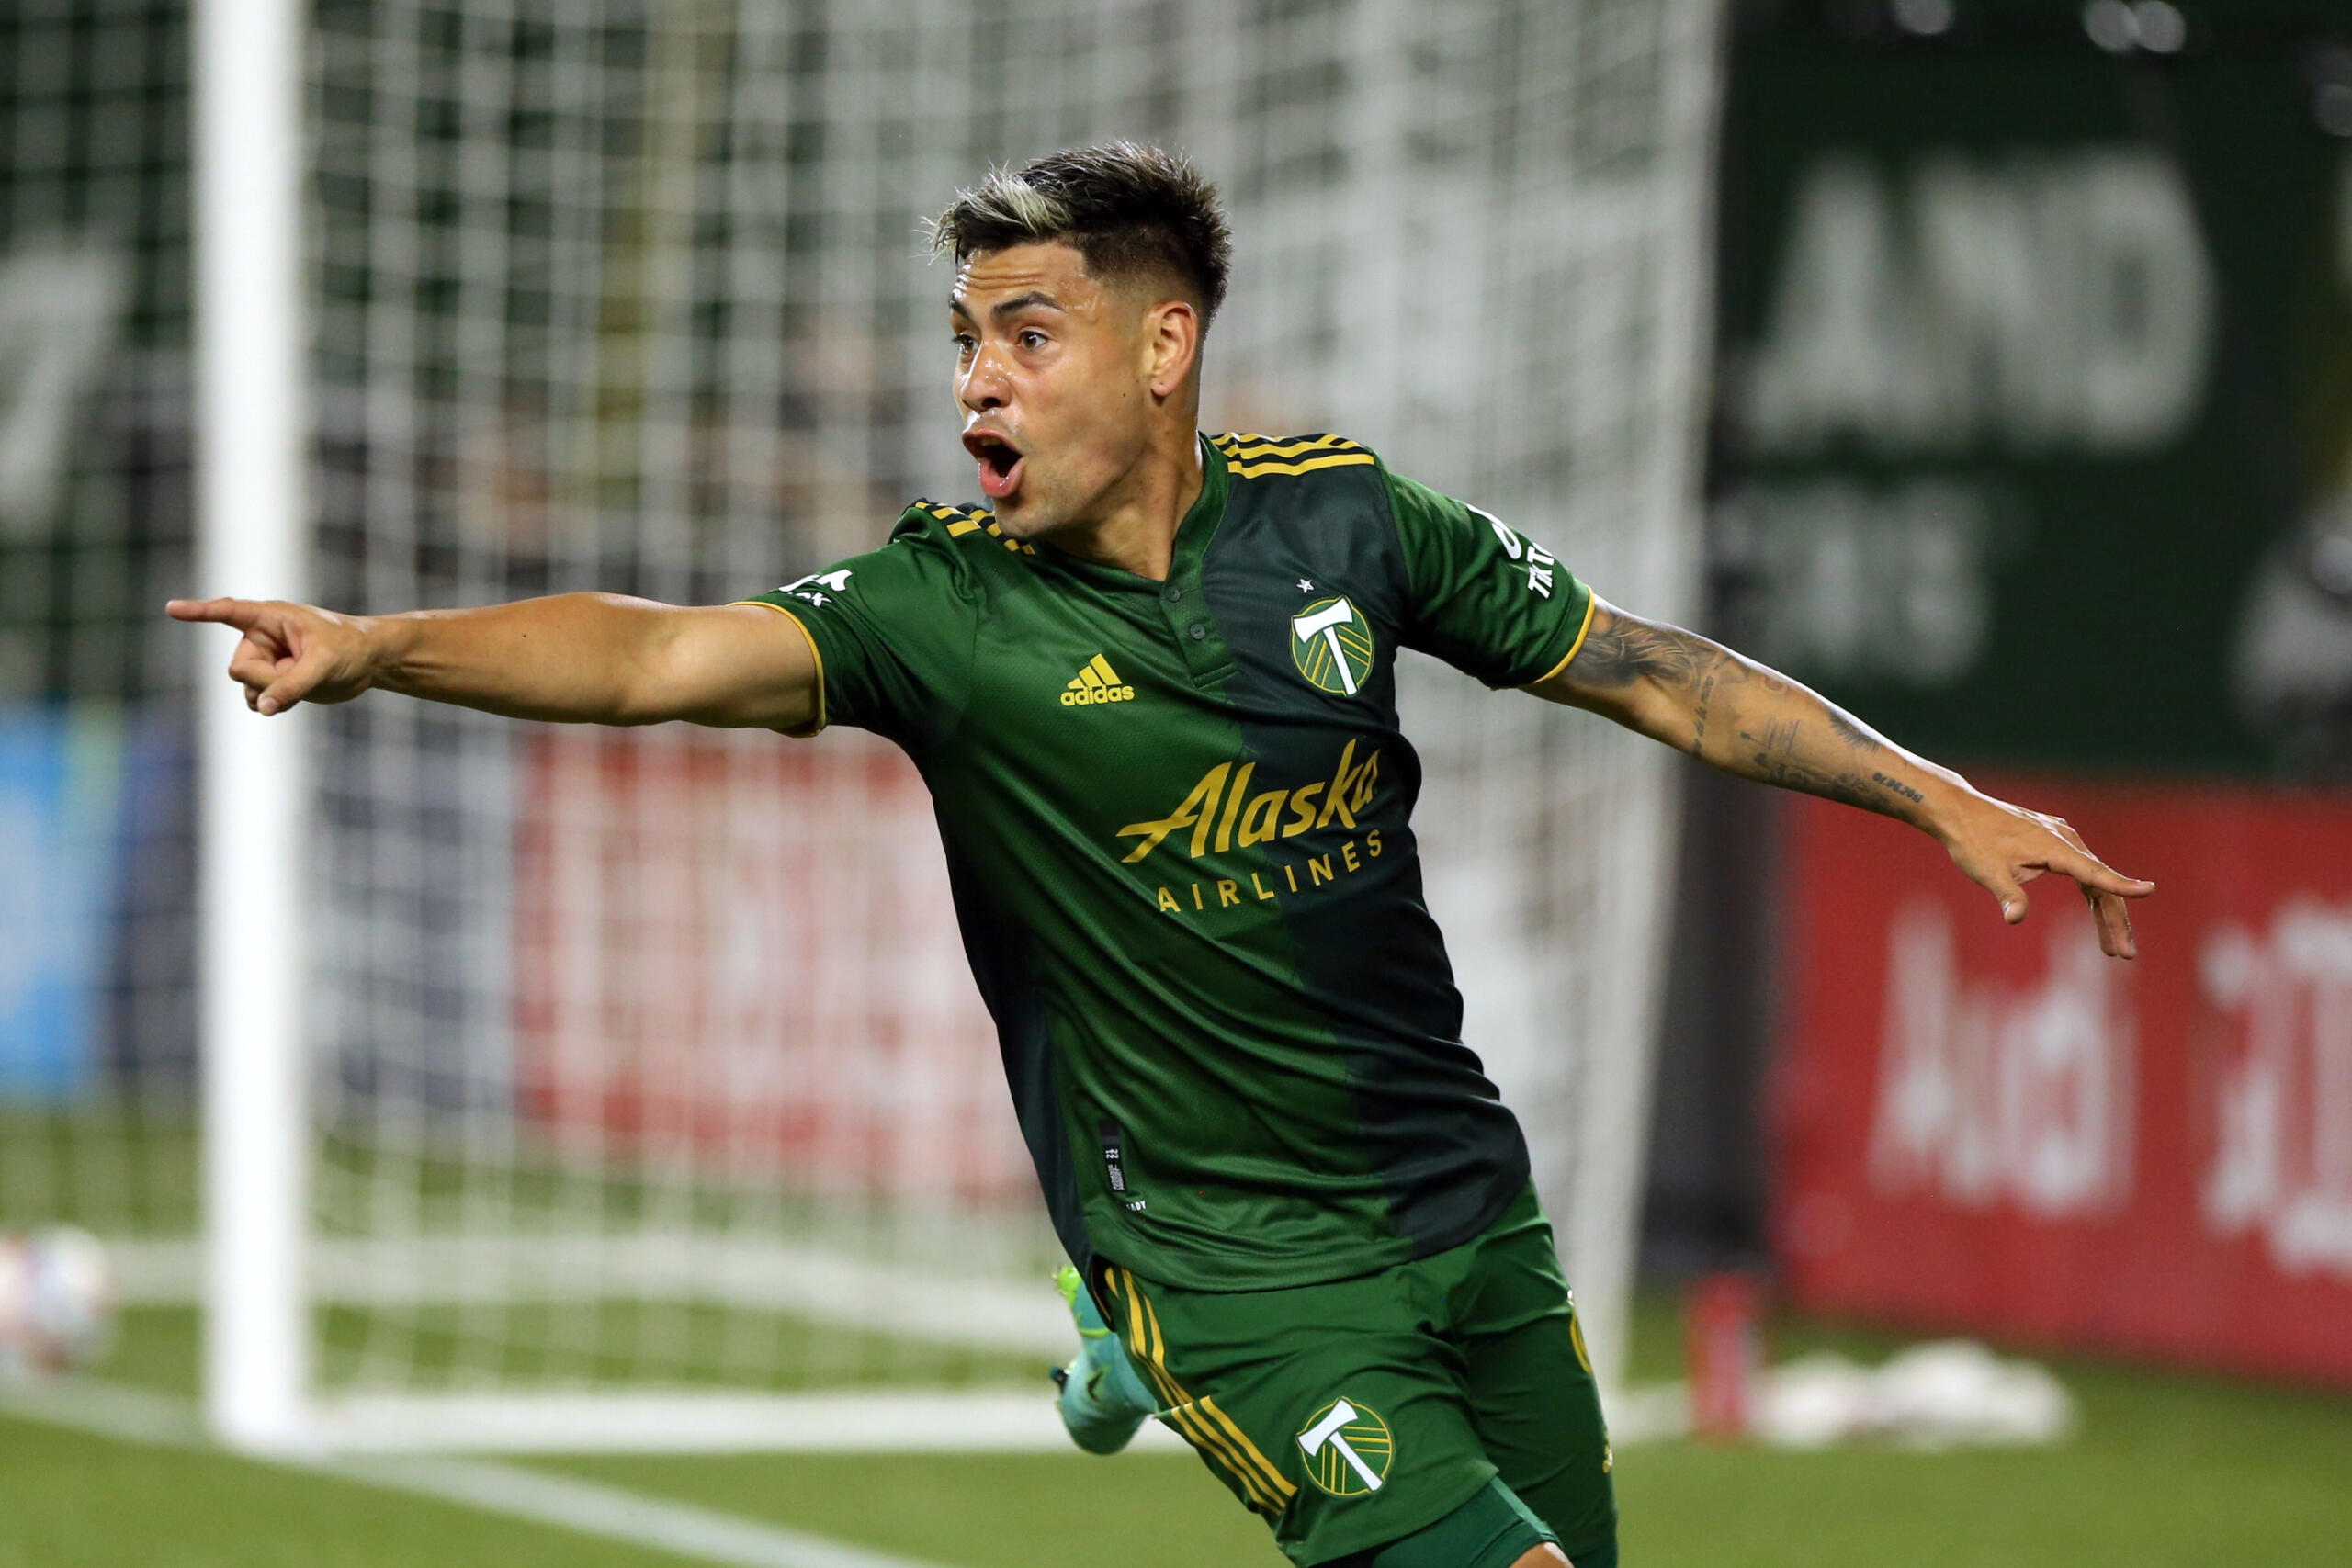 Portland Timbers forward Filipe Mora celebrates his header for a goal in extra time to give the Timbers a 2-1 win over Los Angeles FC in an MLS soccer match Wednesday, July 21, 2021, in Portland, Ore.